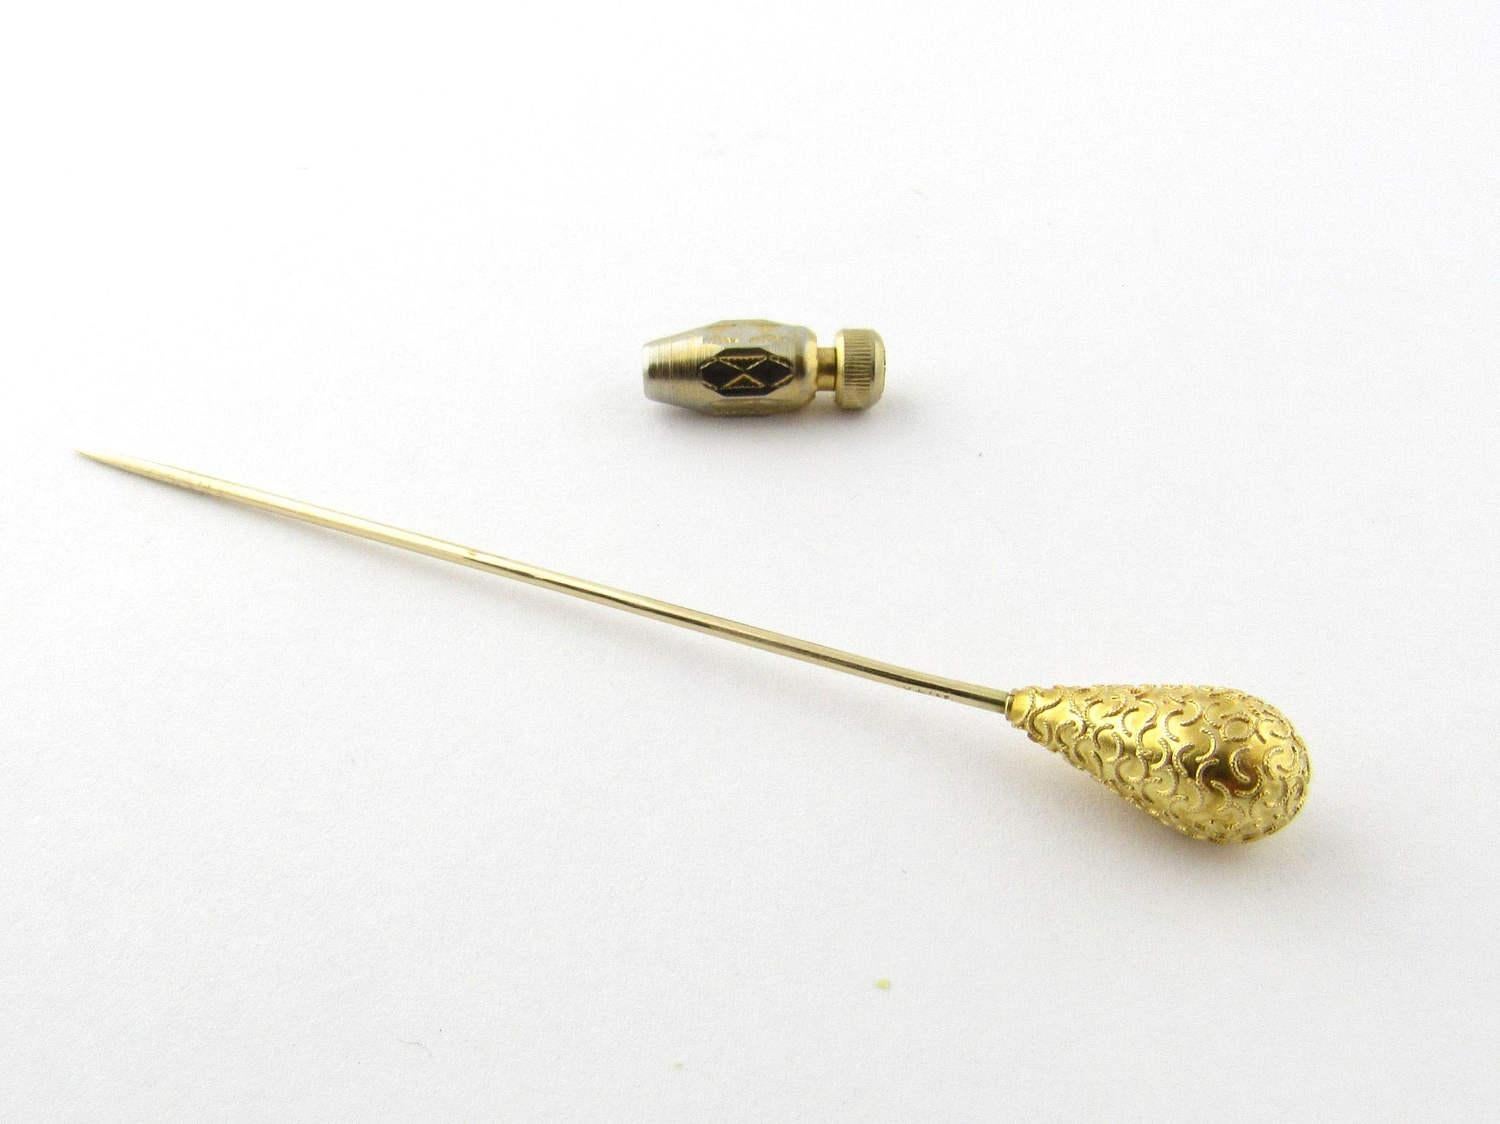 Vintage 14 Karat Yellow Gold Hat Pin-   This lovely hat pin is crafted in beautifully detailed 14K gold.   Size: 70 mm   Weight: 0.9 dwt. / 1.4 gr. (pin only)   Hallmark: 14K   Very good condition, professionally polished.   Will come packaged in a